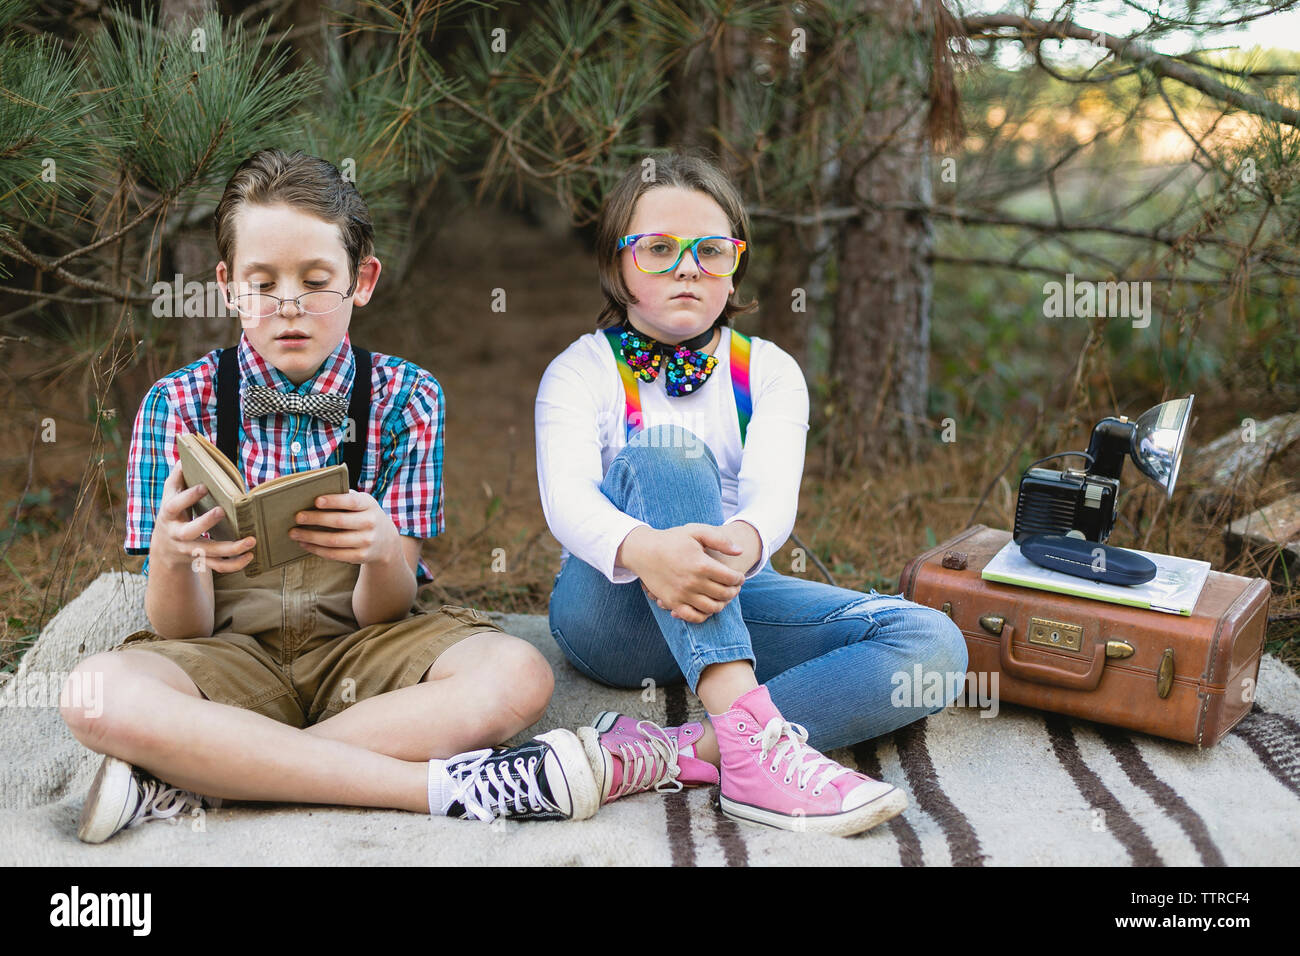 Siblings in old-fashioned costume sitting on blanket with antique camera at forest Stock Photo